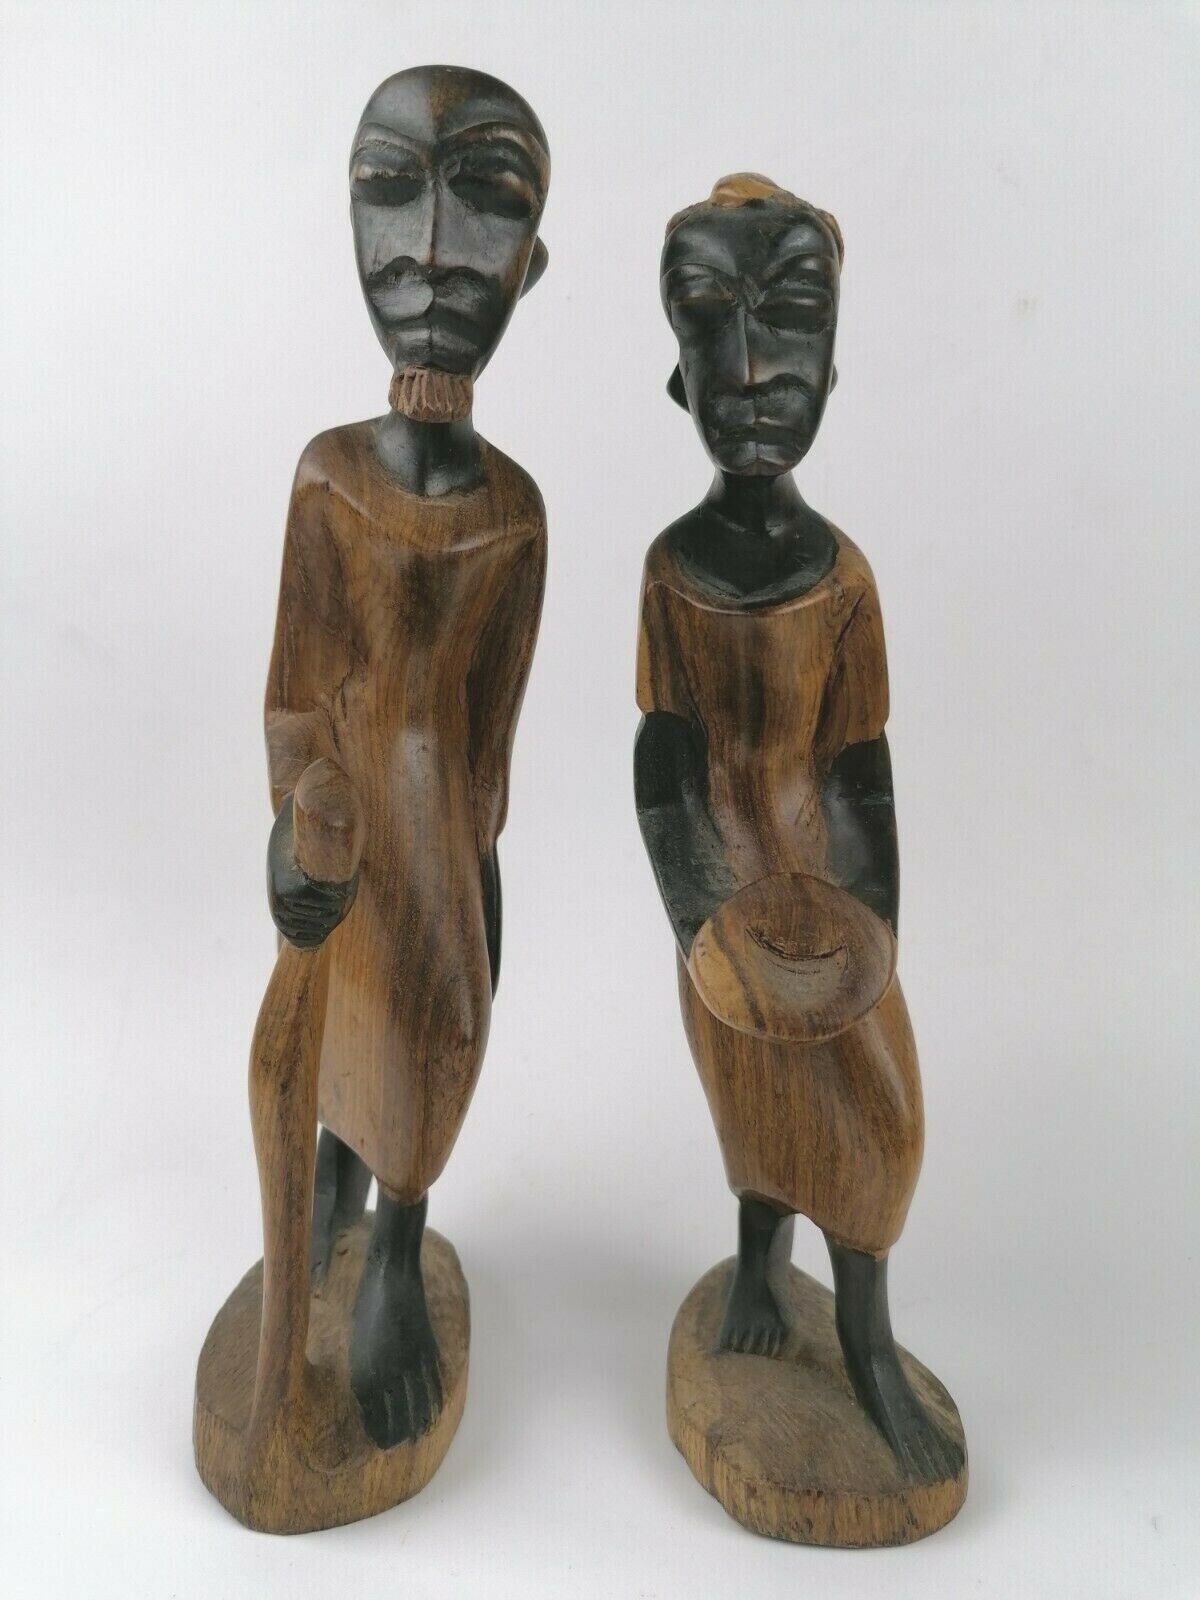 African Tribal Art Man & Woman Carved Wood Figurine Statue